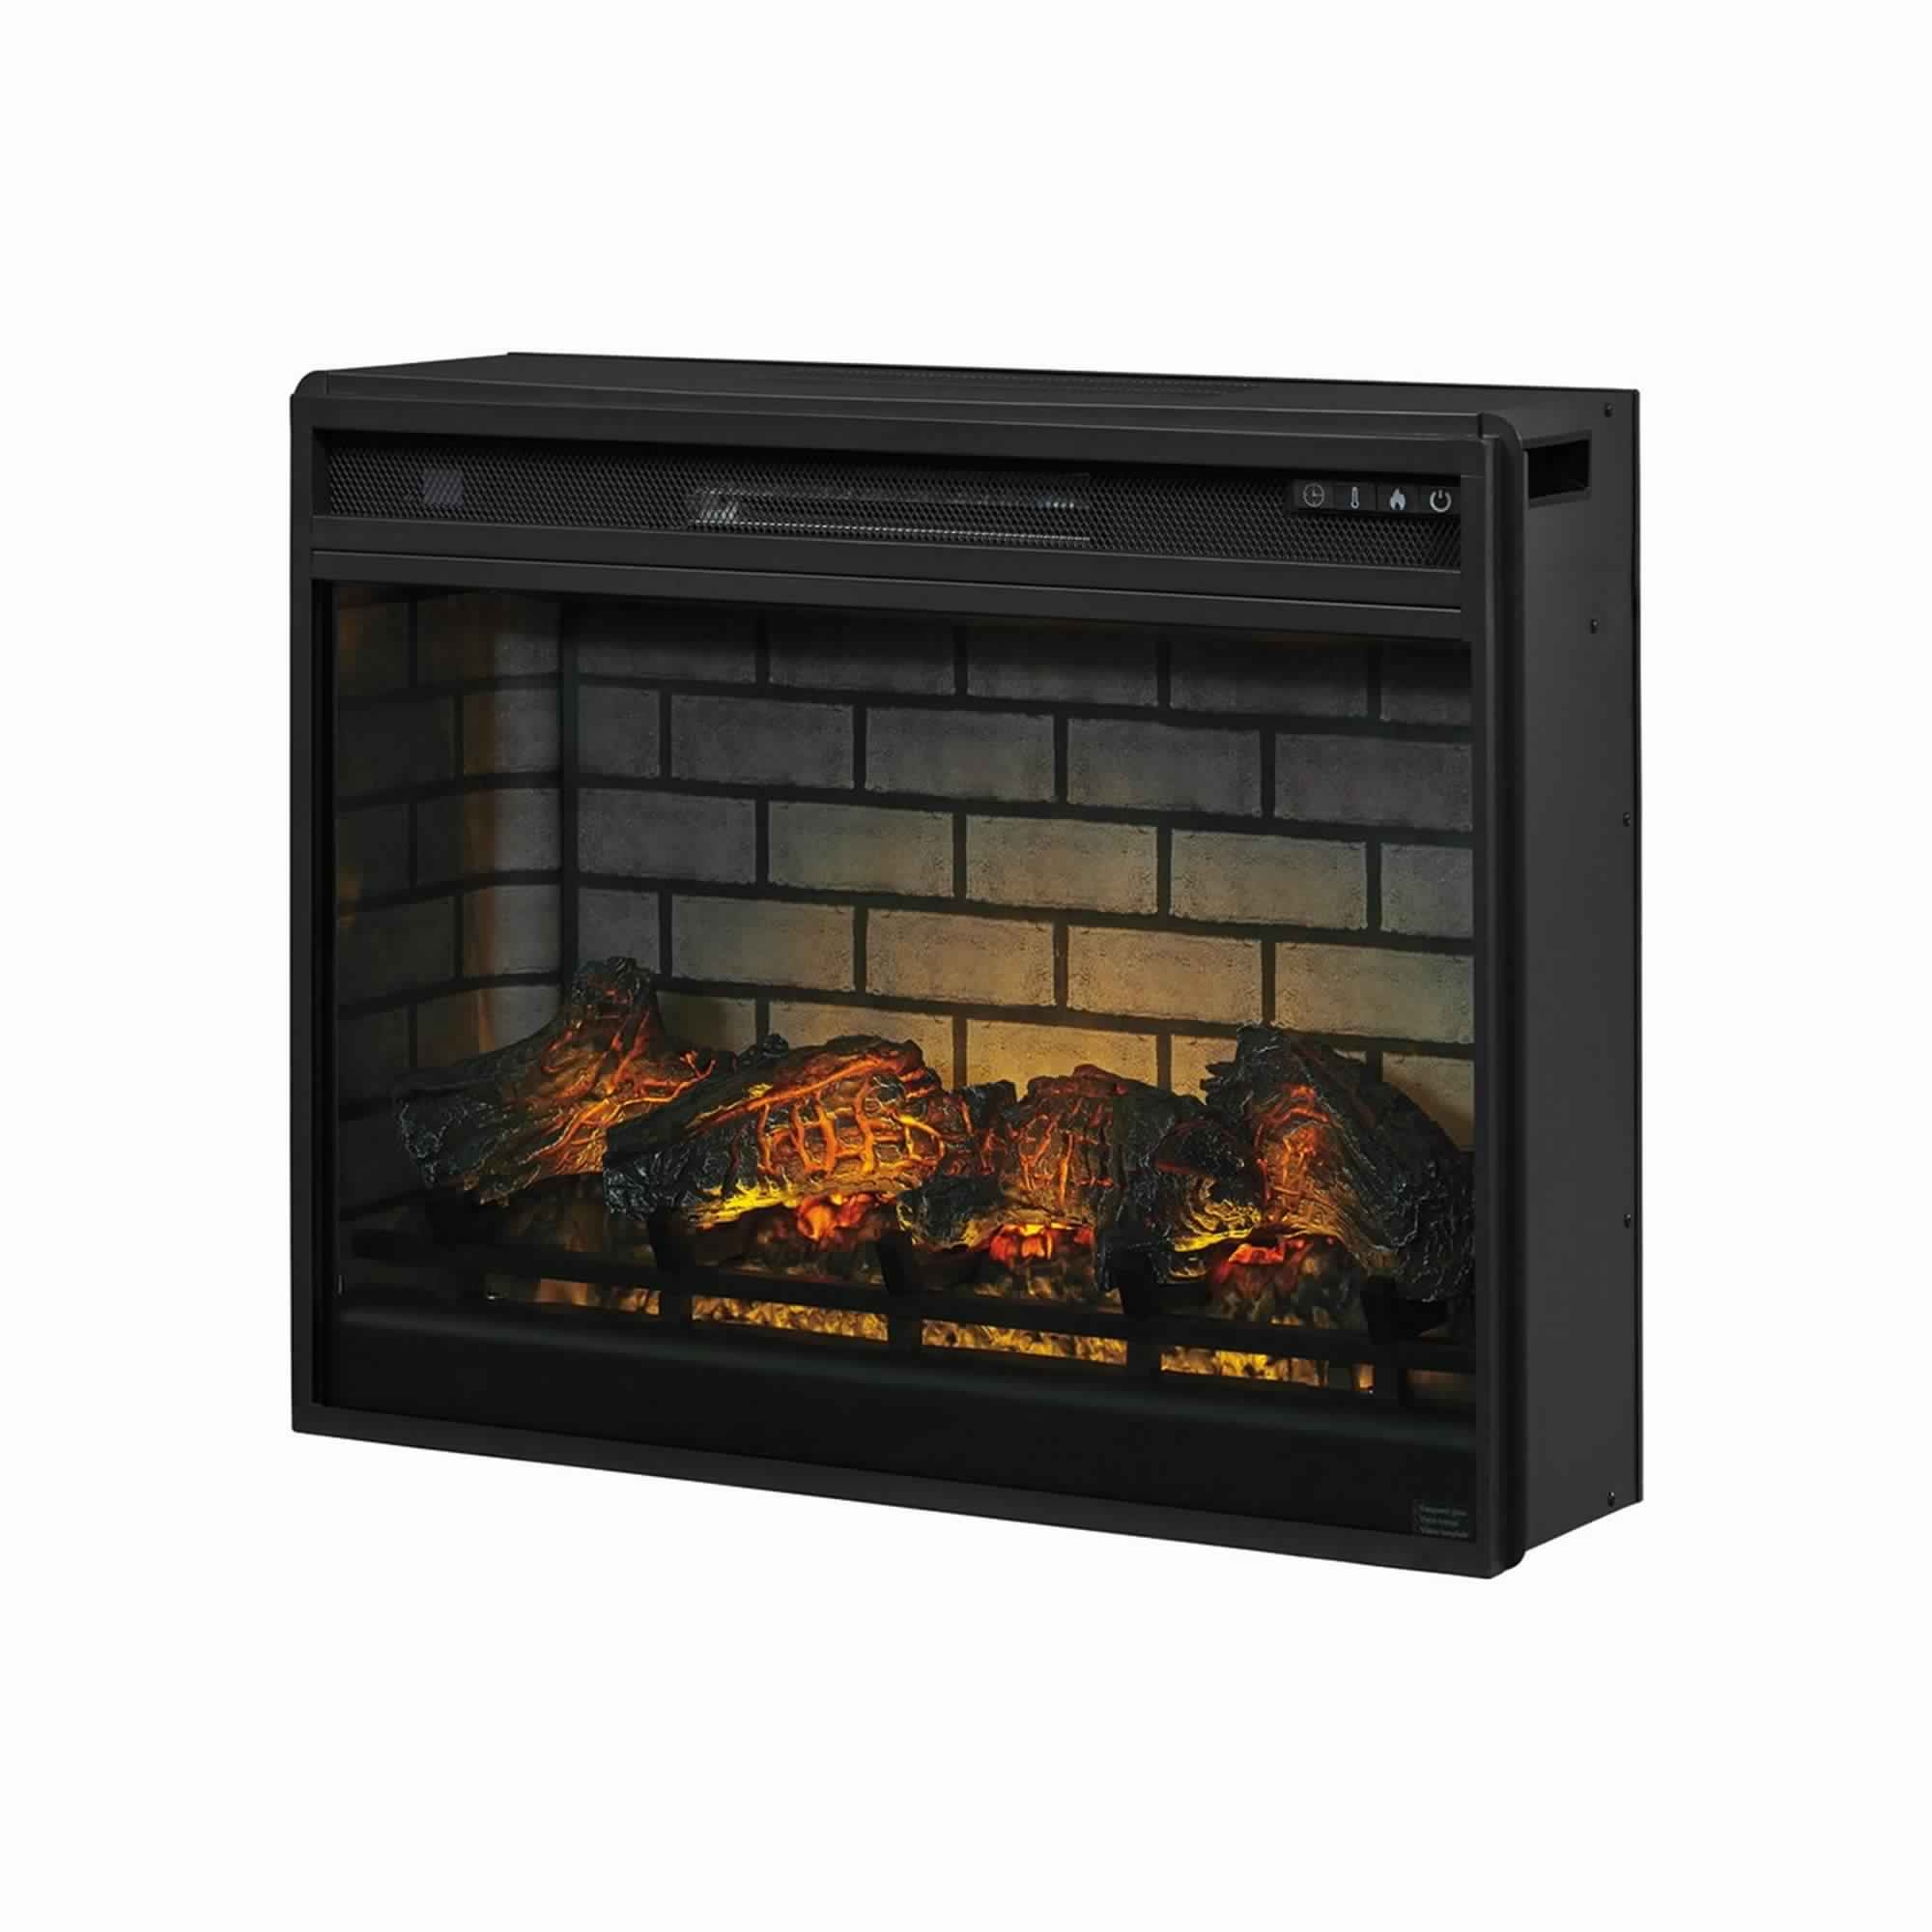 31.25 Inch Metal Fireplace Inset With 7 Level Temperature Setting, Black- Saltoro Sherpi